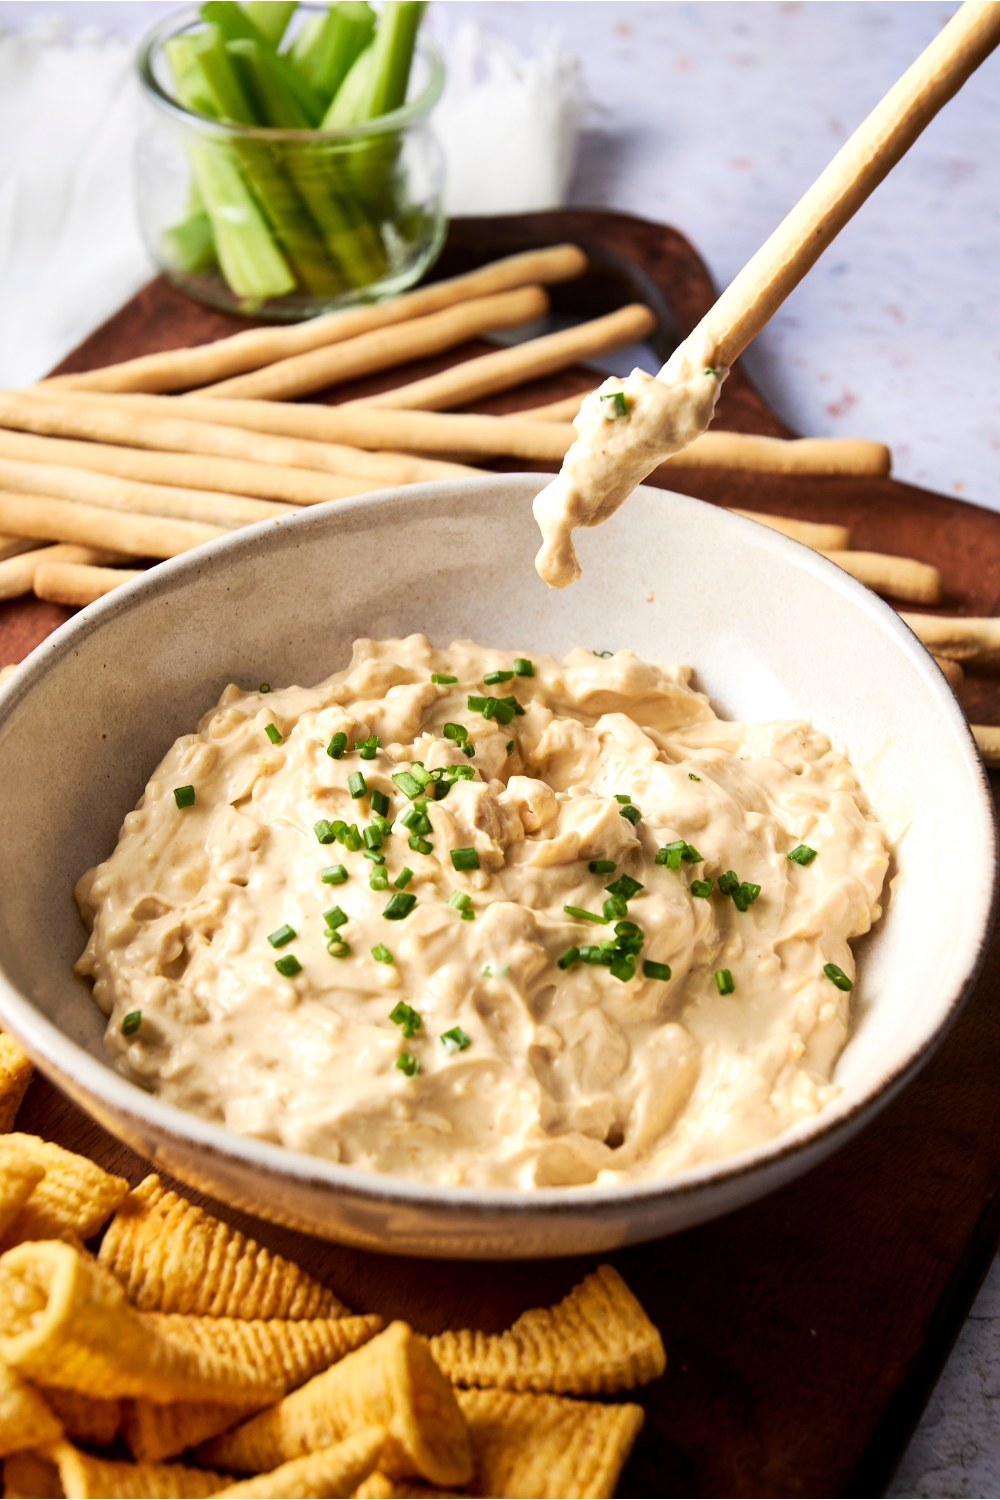 A large white bowl is full of Lipton french onion dip garnished with chives. Someone scoops up the dip with a breadstick.